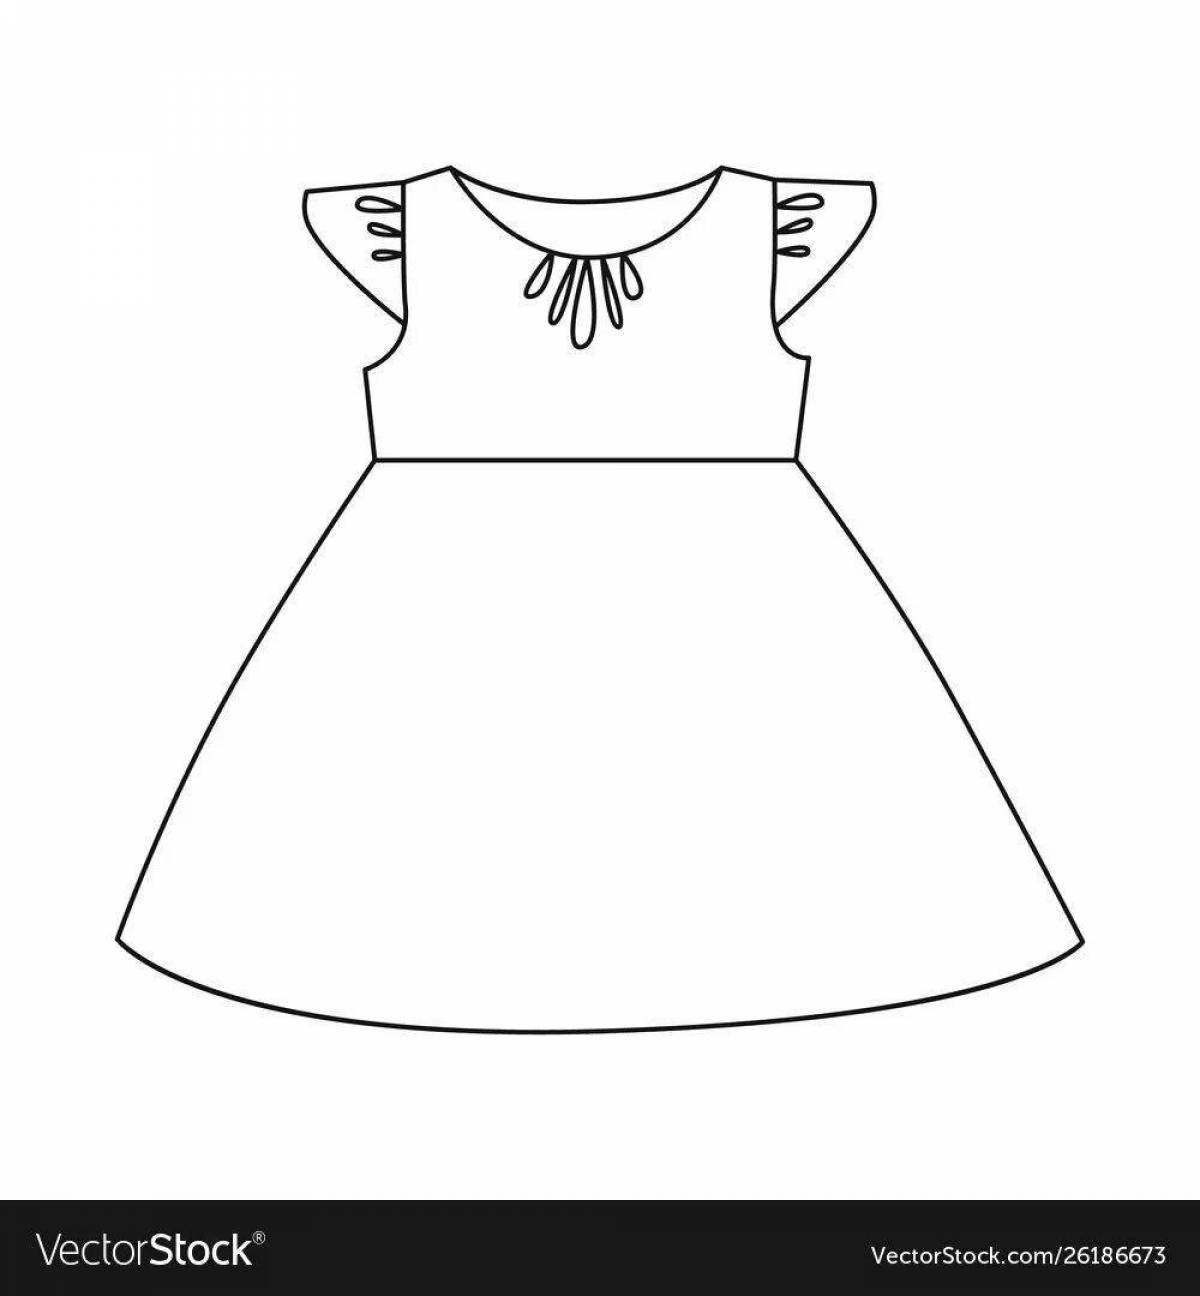 Adorable doll coloring dress for 3-4 year olds